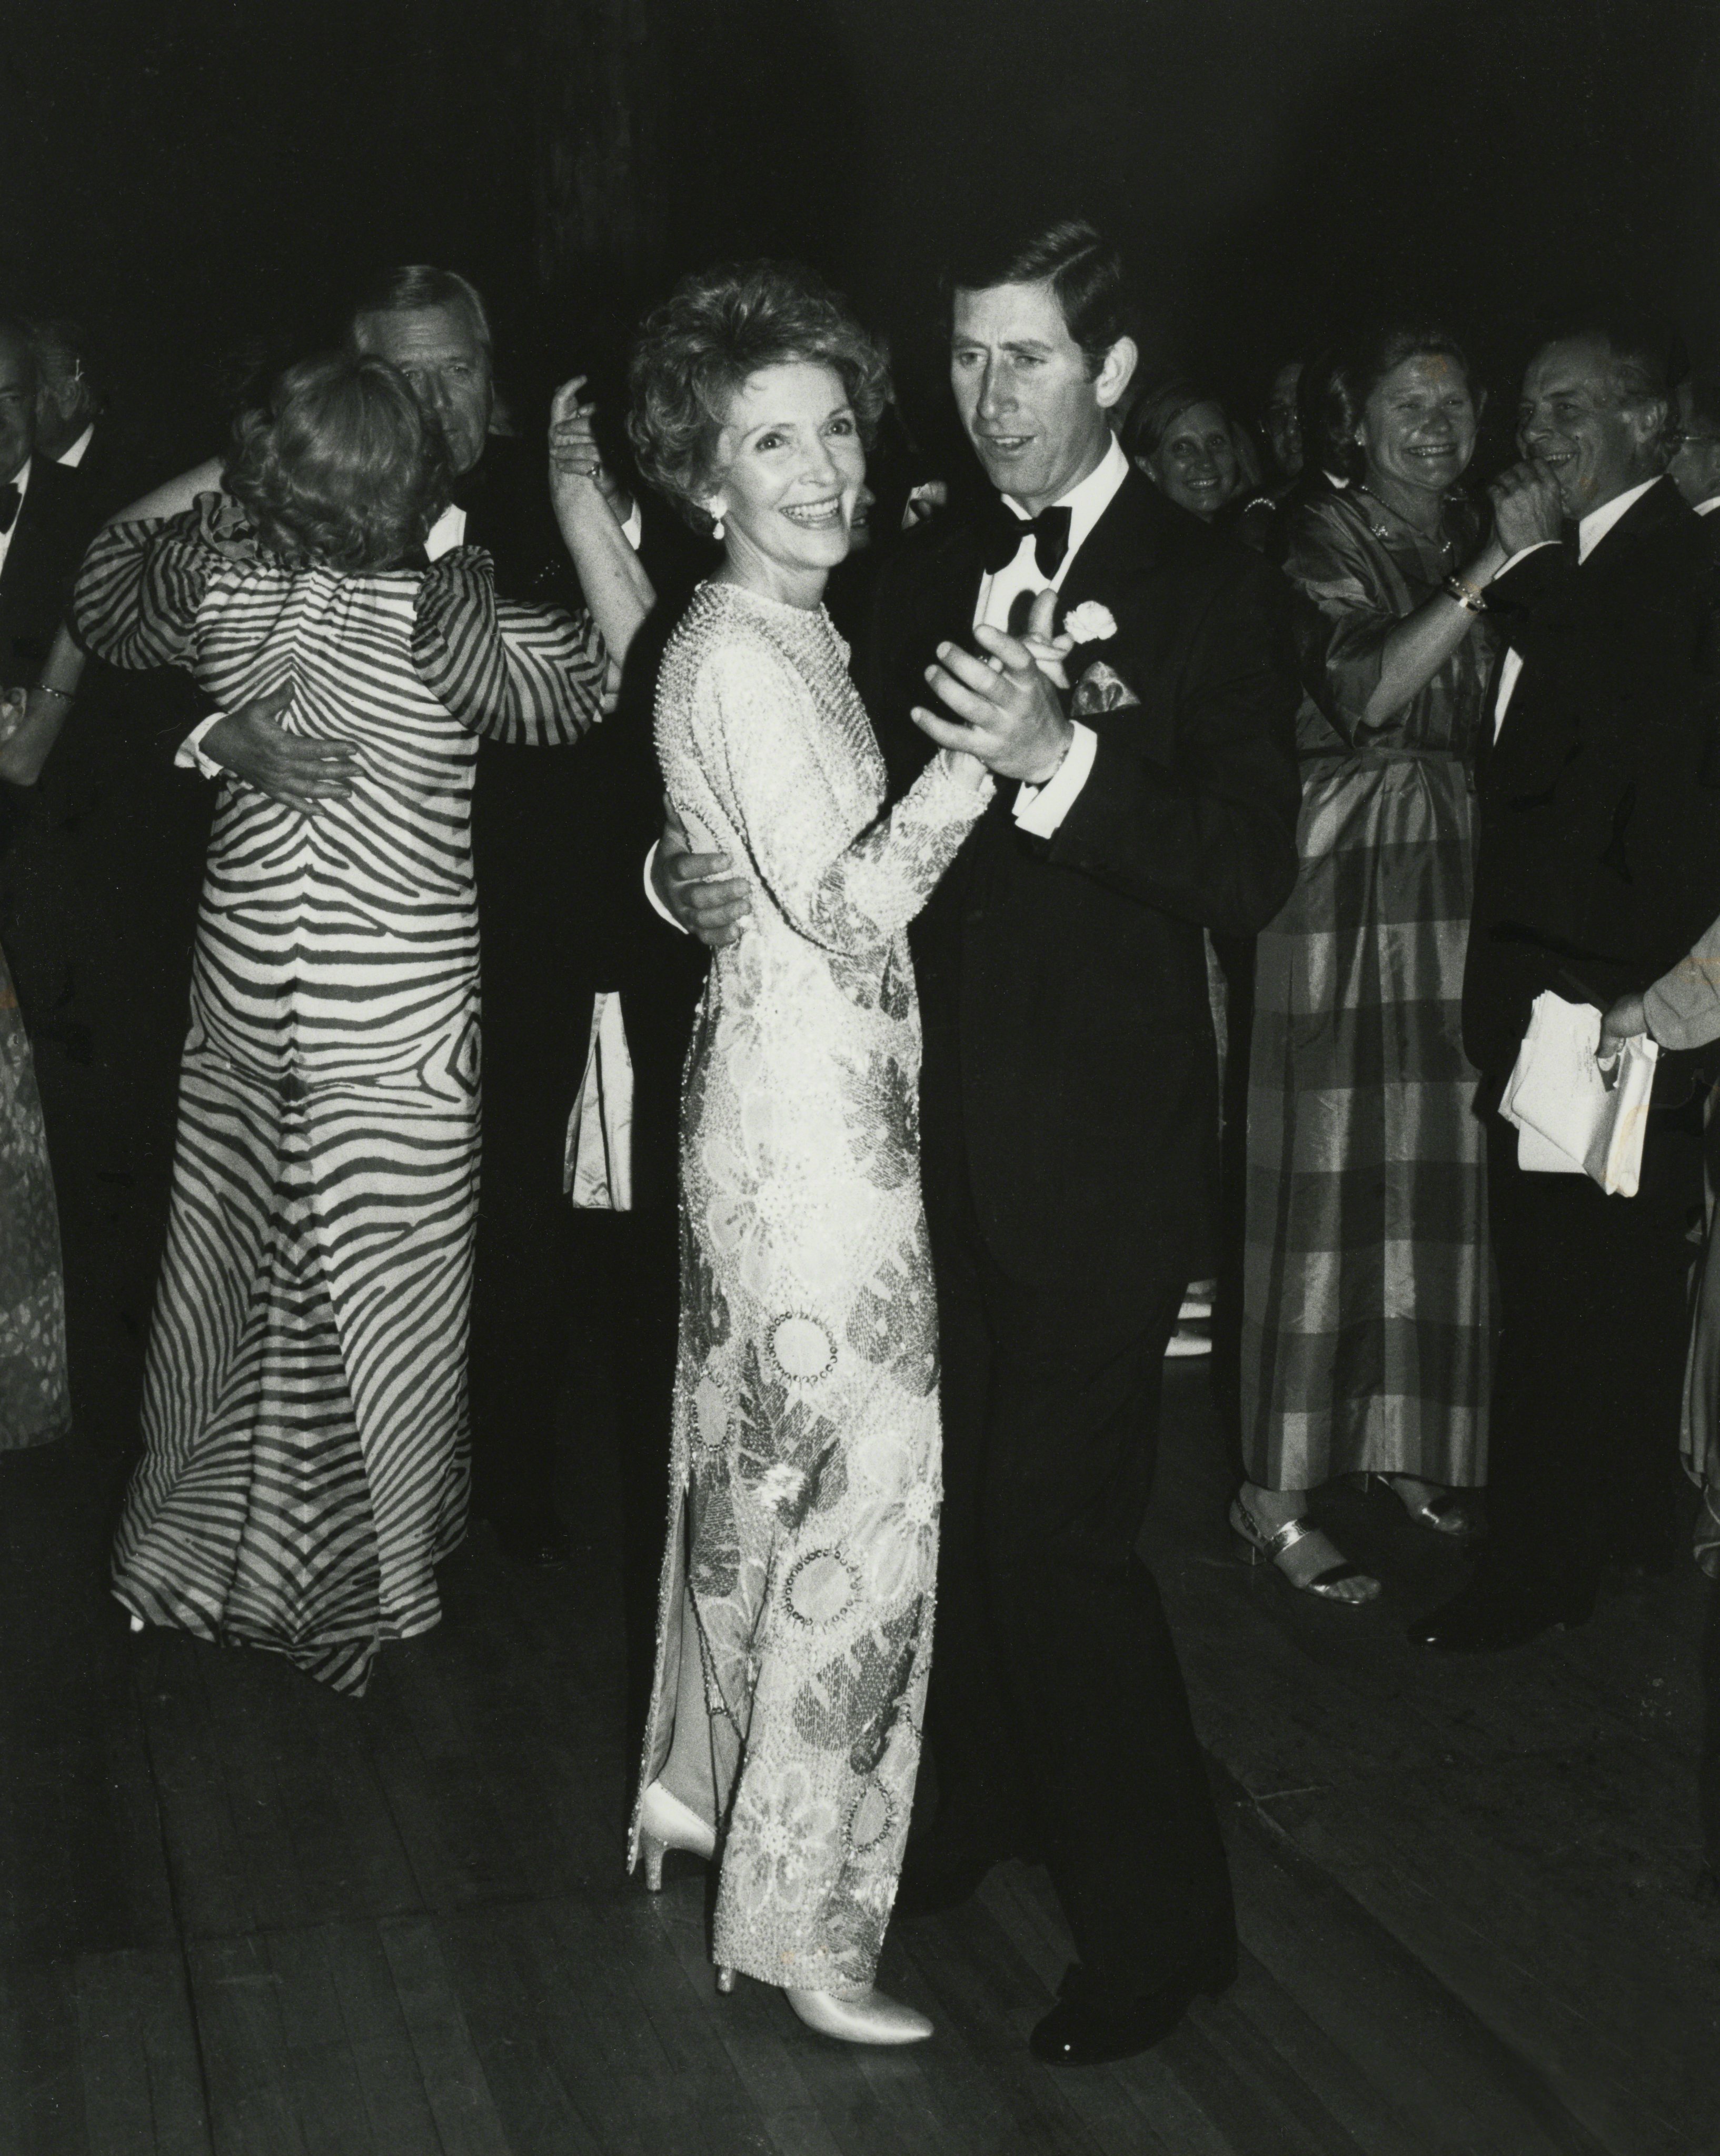 Prince Charles dances with First Lady Nancy Reagan